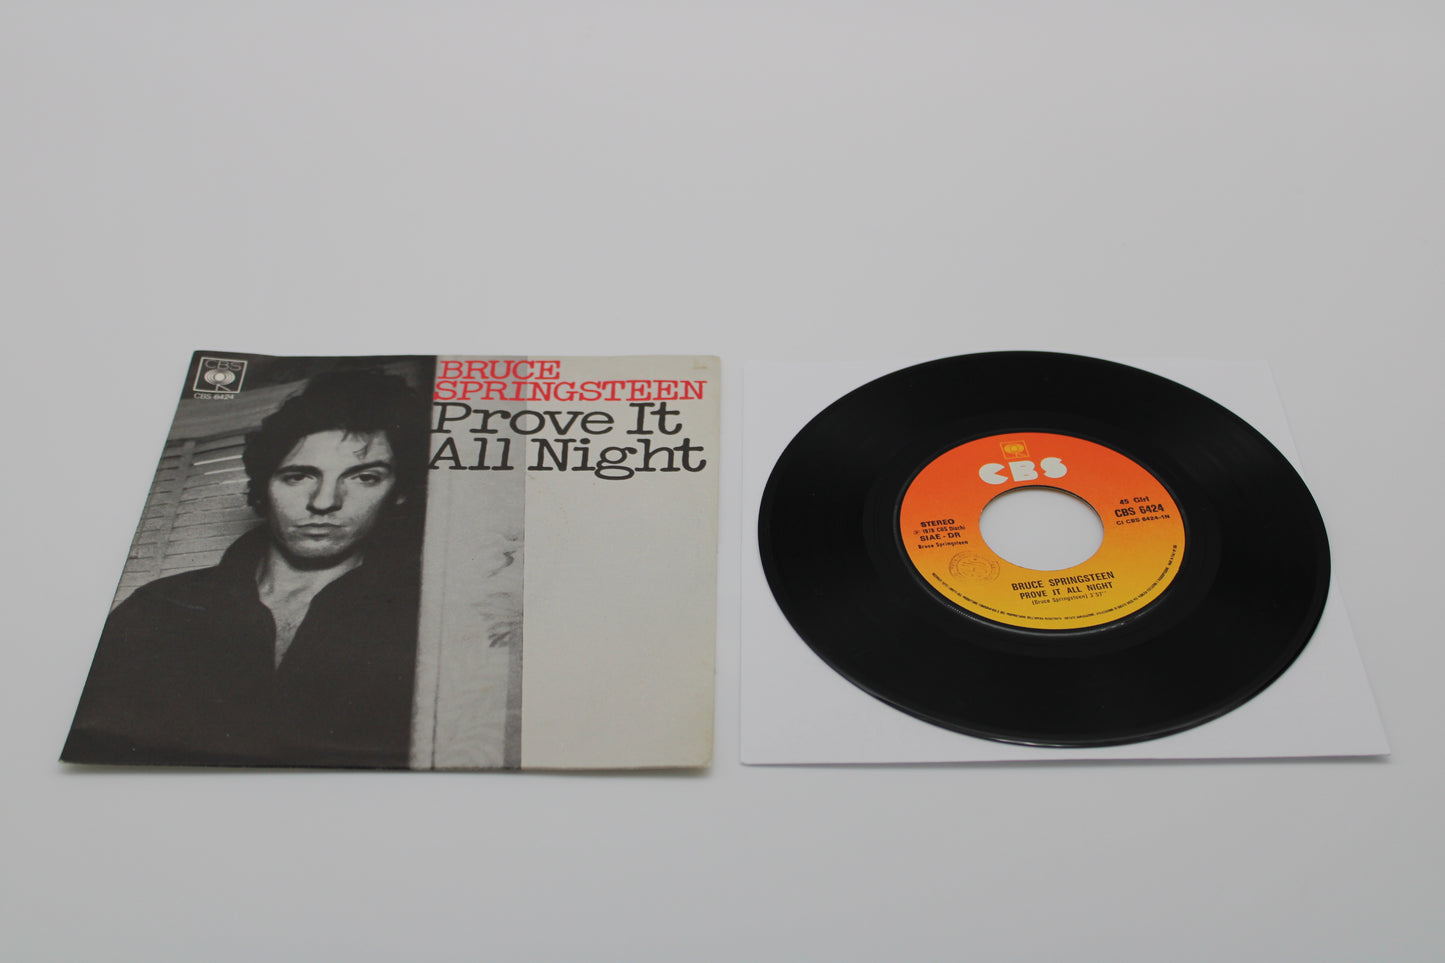 Bruce Springsteen - Prove it All Night - 45 Record 1978  Import from Italy Near Mint